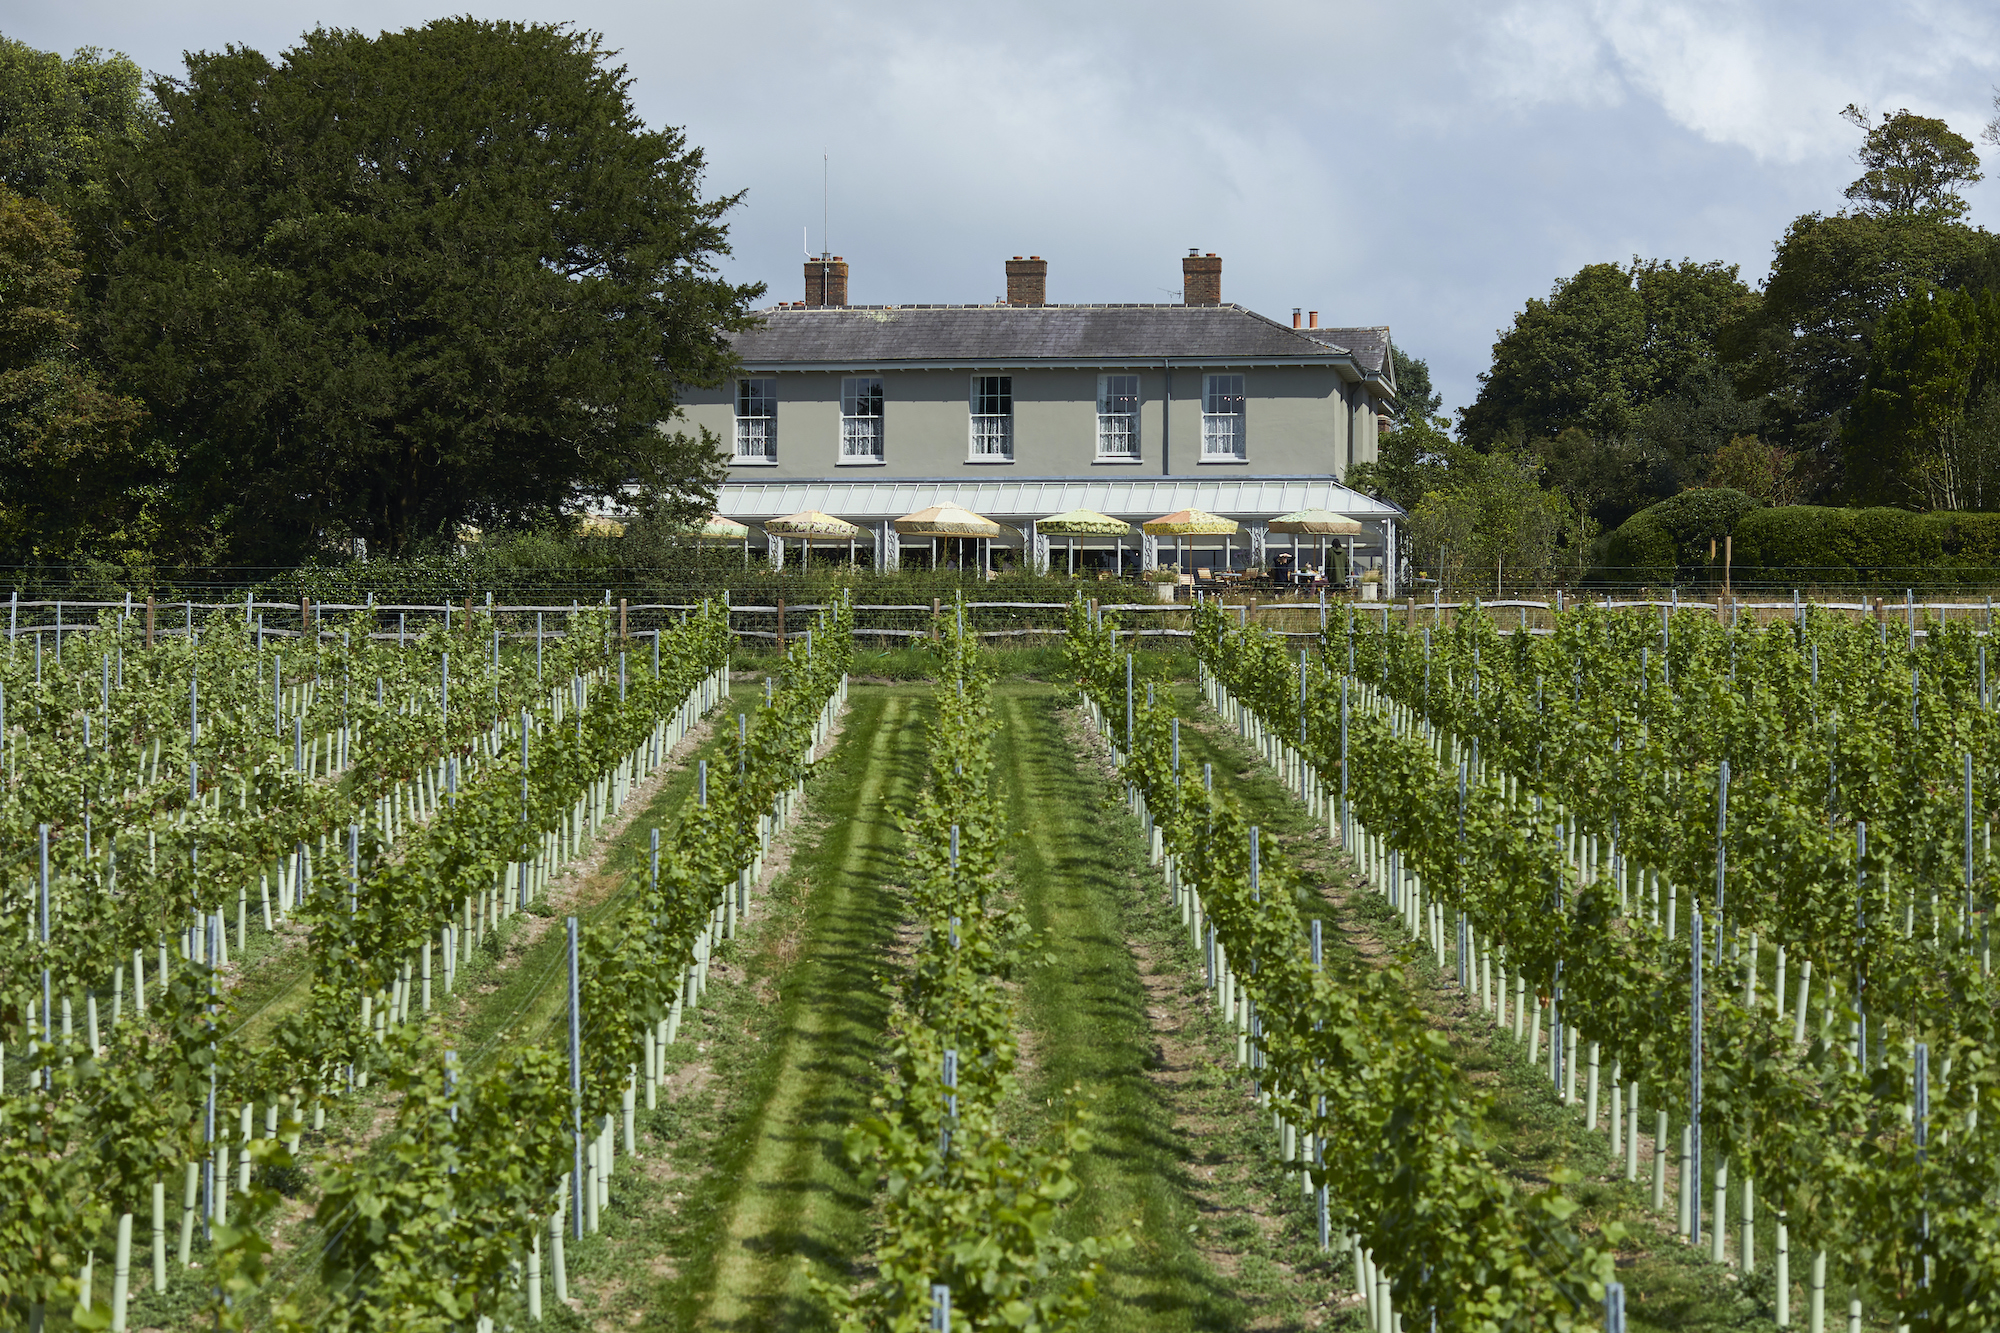 The Most Stylish Sussex Stays For Wine Lovers